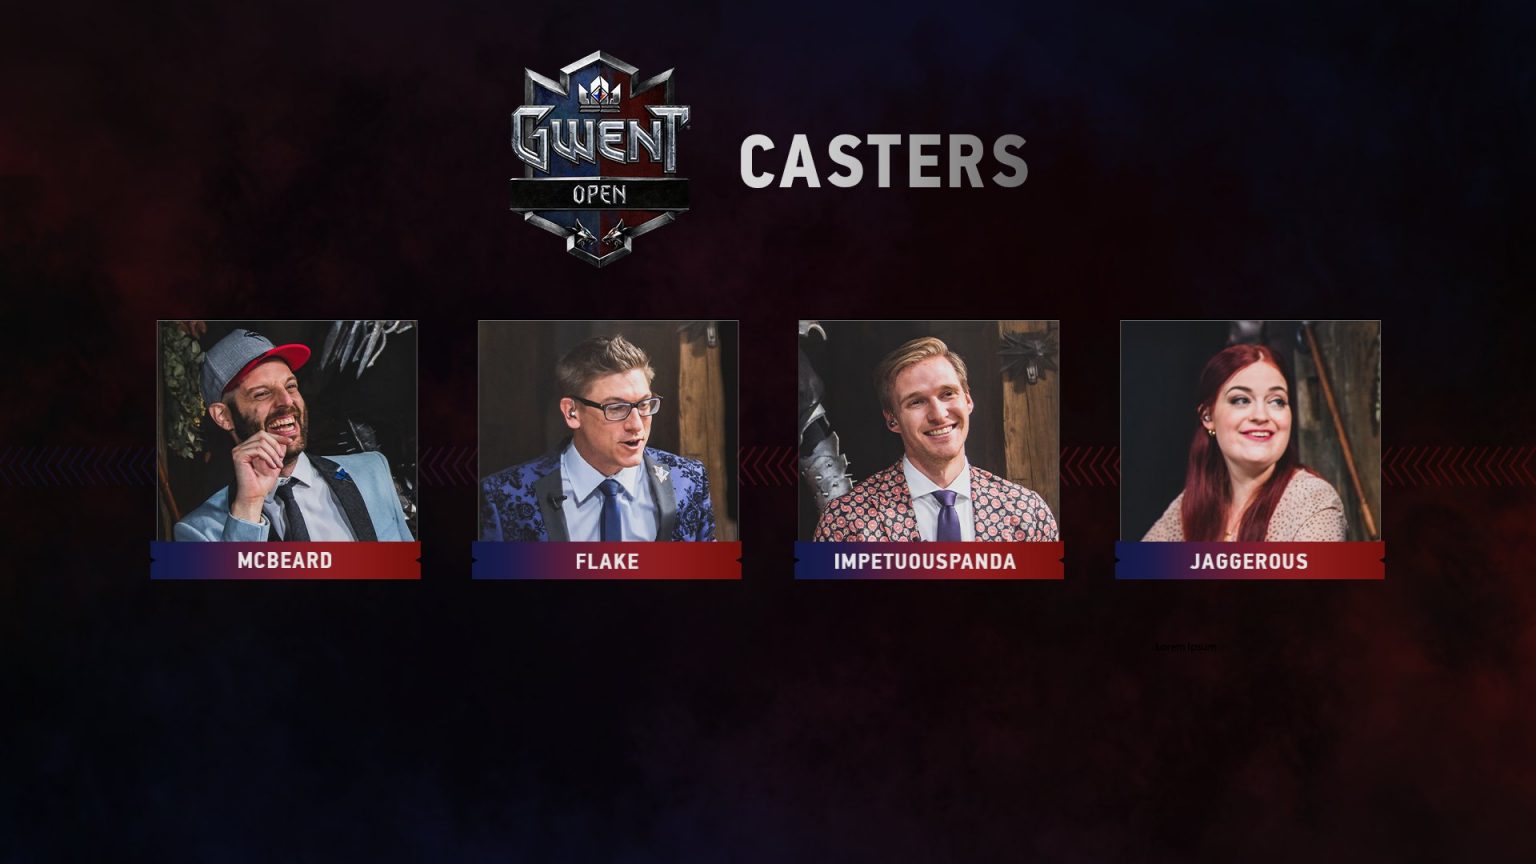 Casters do torneio GWENT OPEN 1